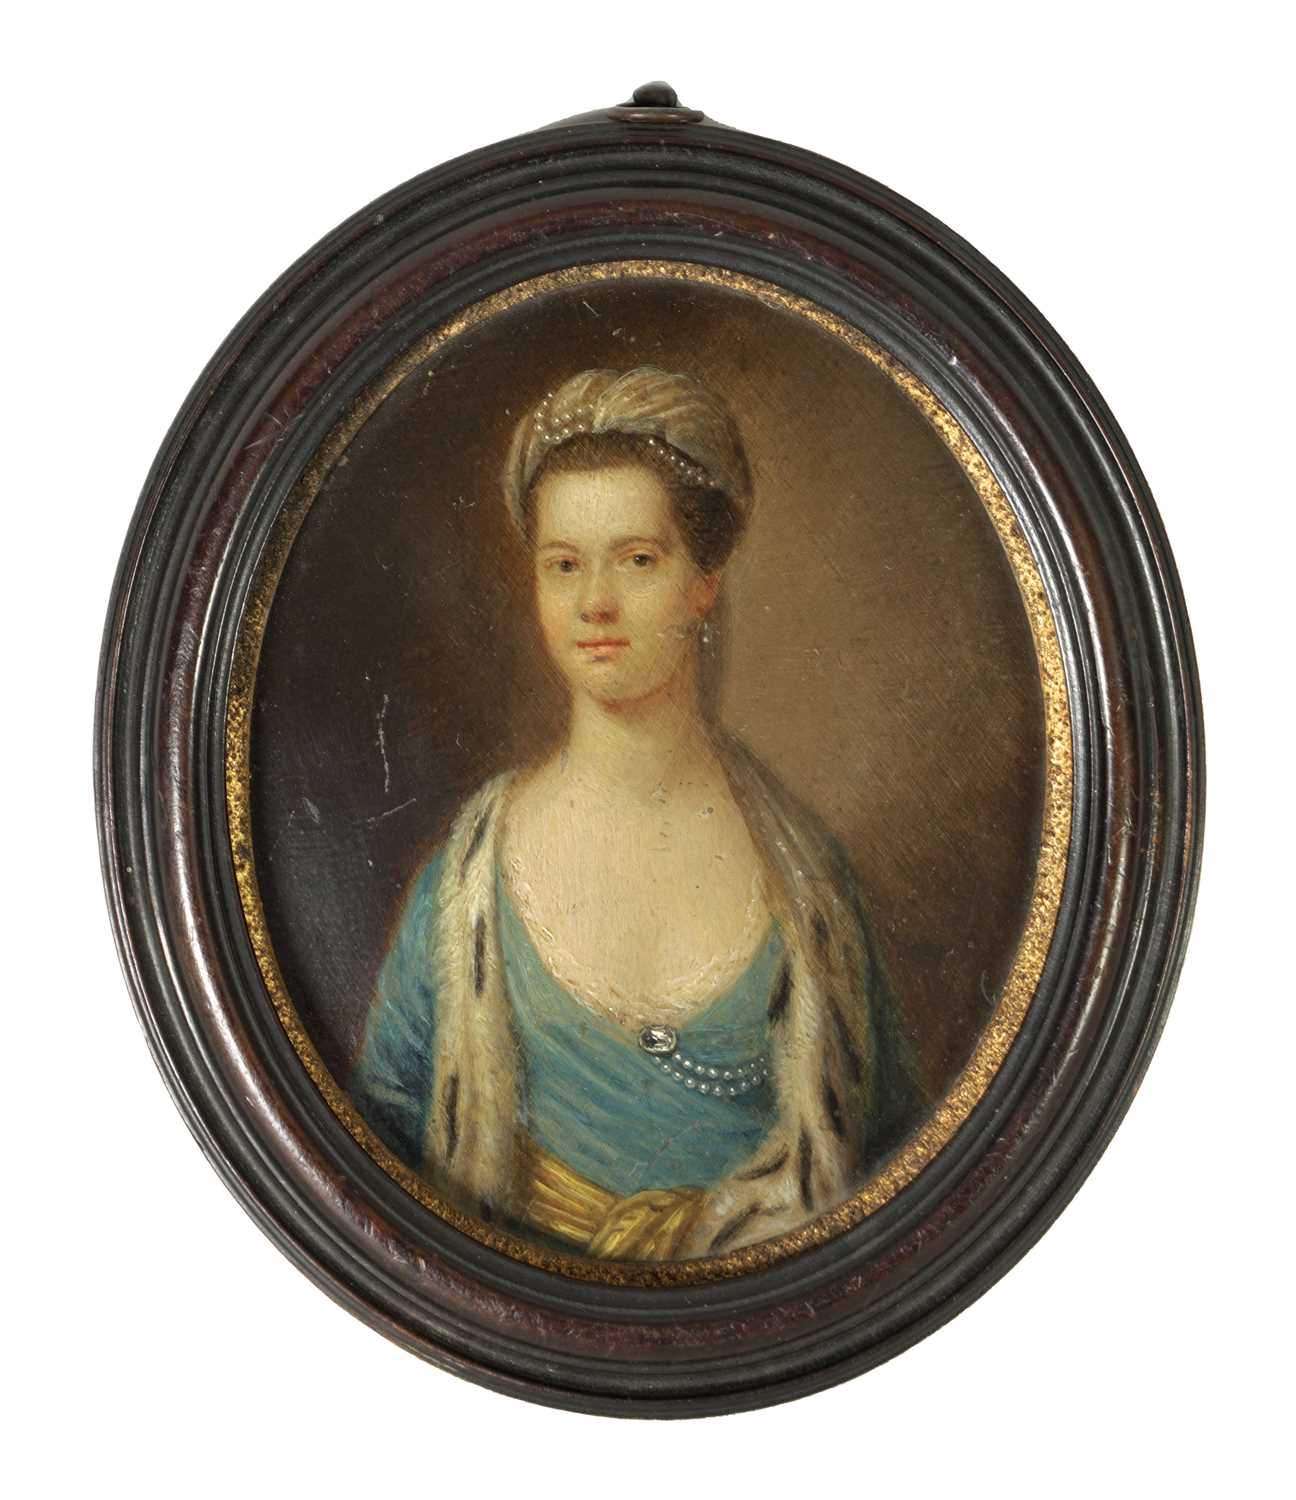 AN EARLY 18TH CENTURY OIL ON COPPER - PORTRAIT OF A LADY